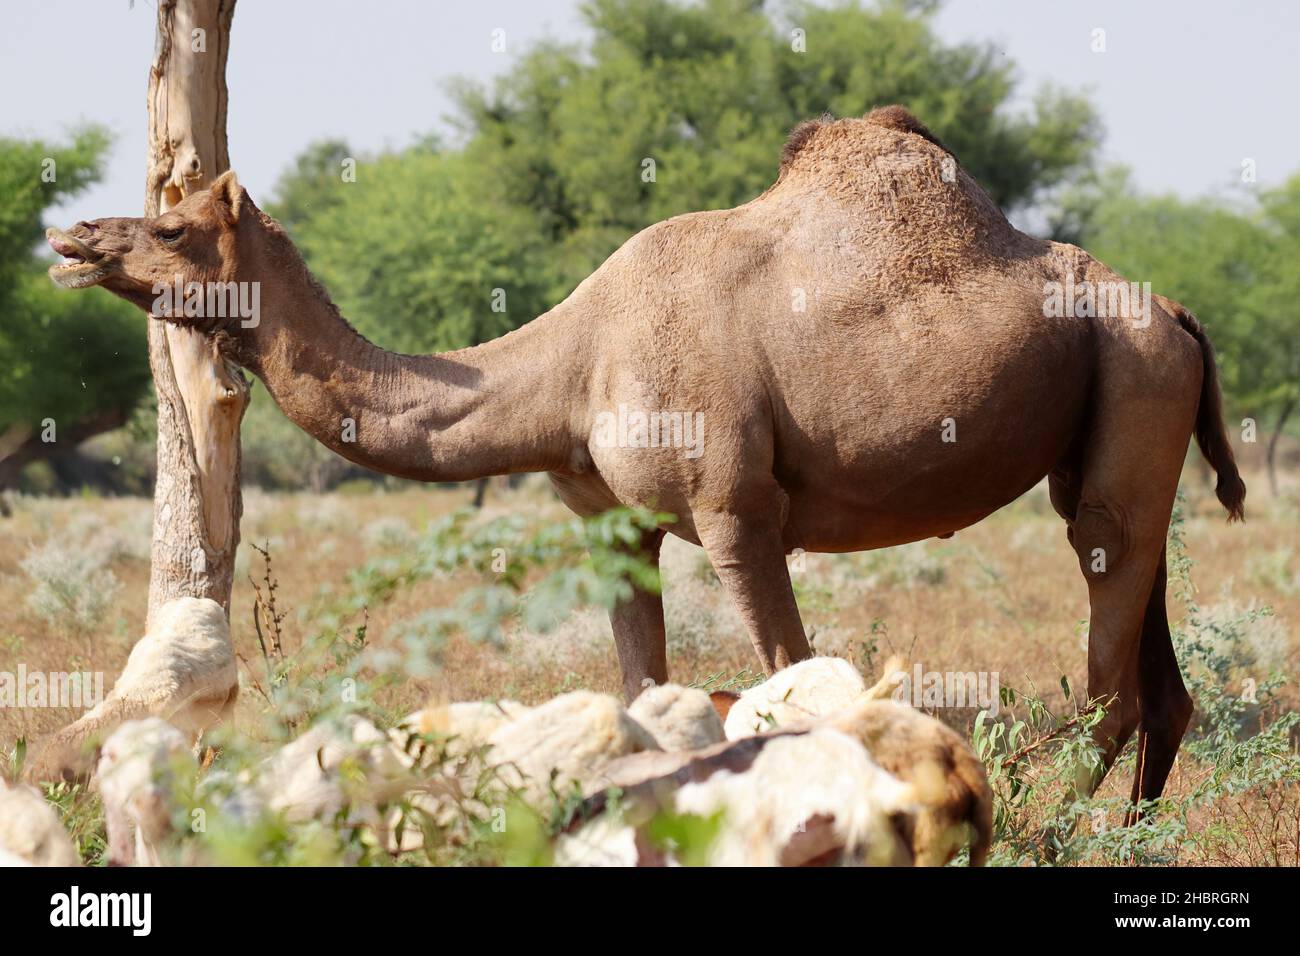 Close-up of Female camel standing with a herd of goats in the forest, Rajasthan Stock Photo